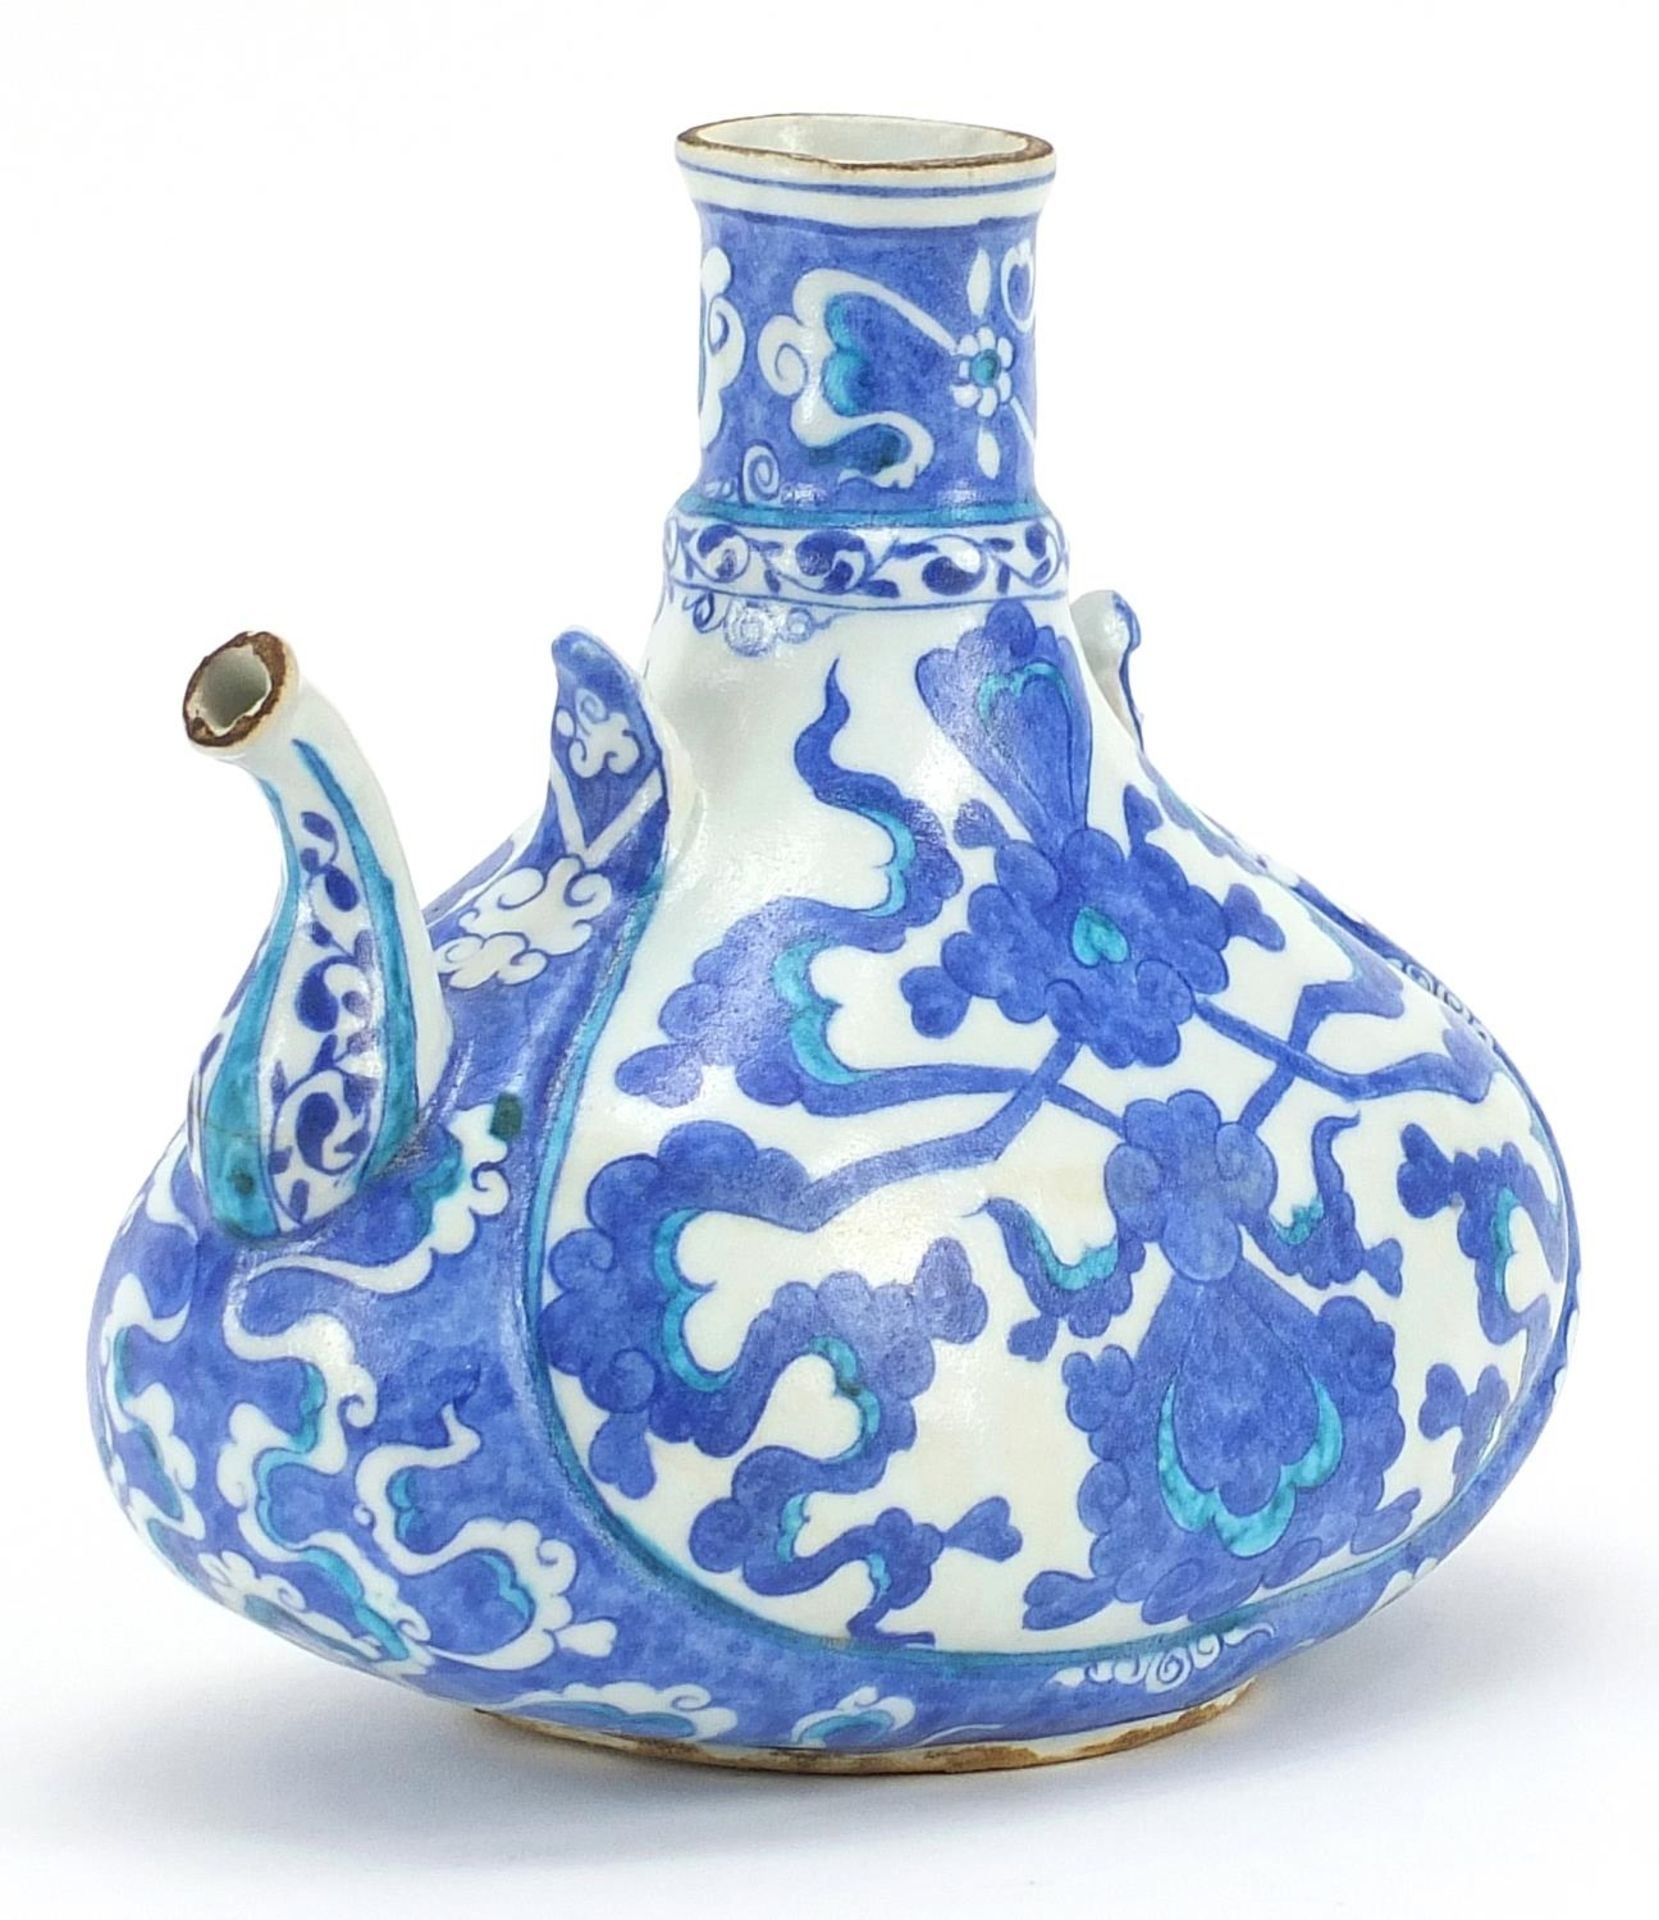 Turkish Iznik pottery water jug hand painted with scrolling foliage, 17.5cm high